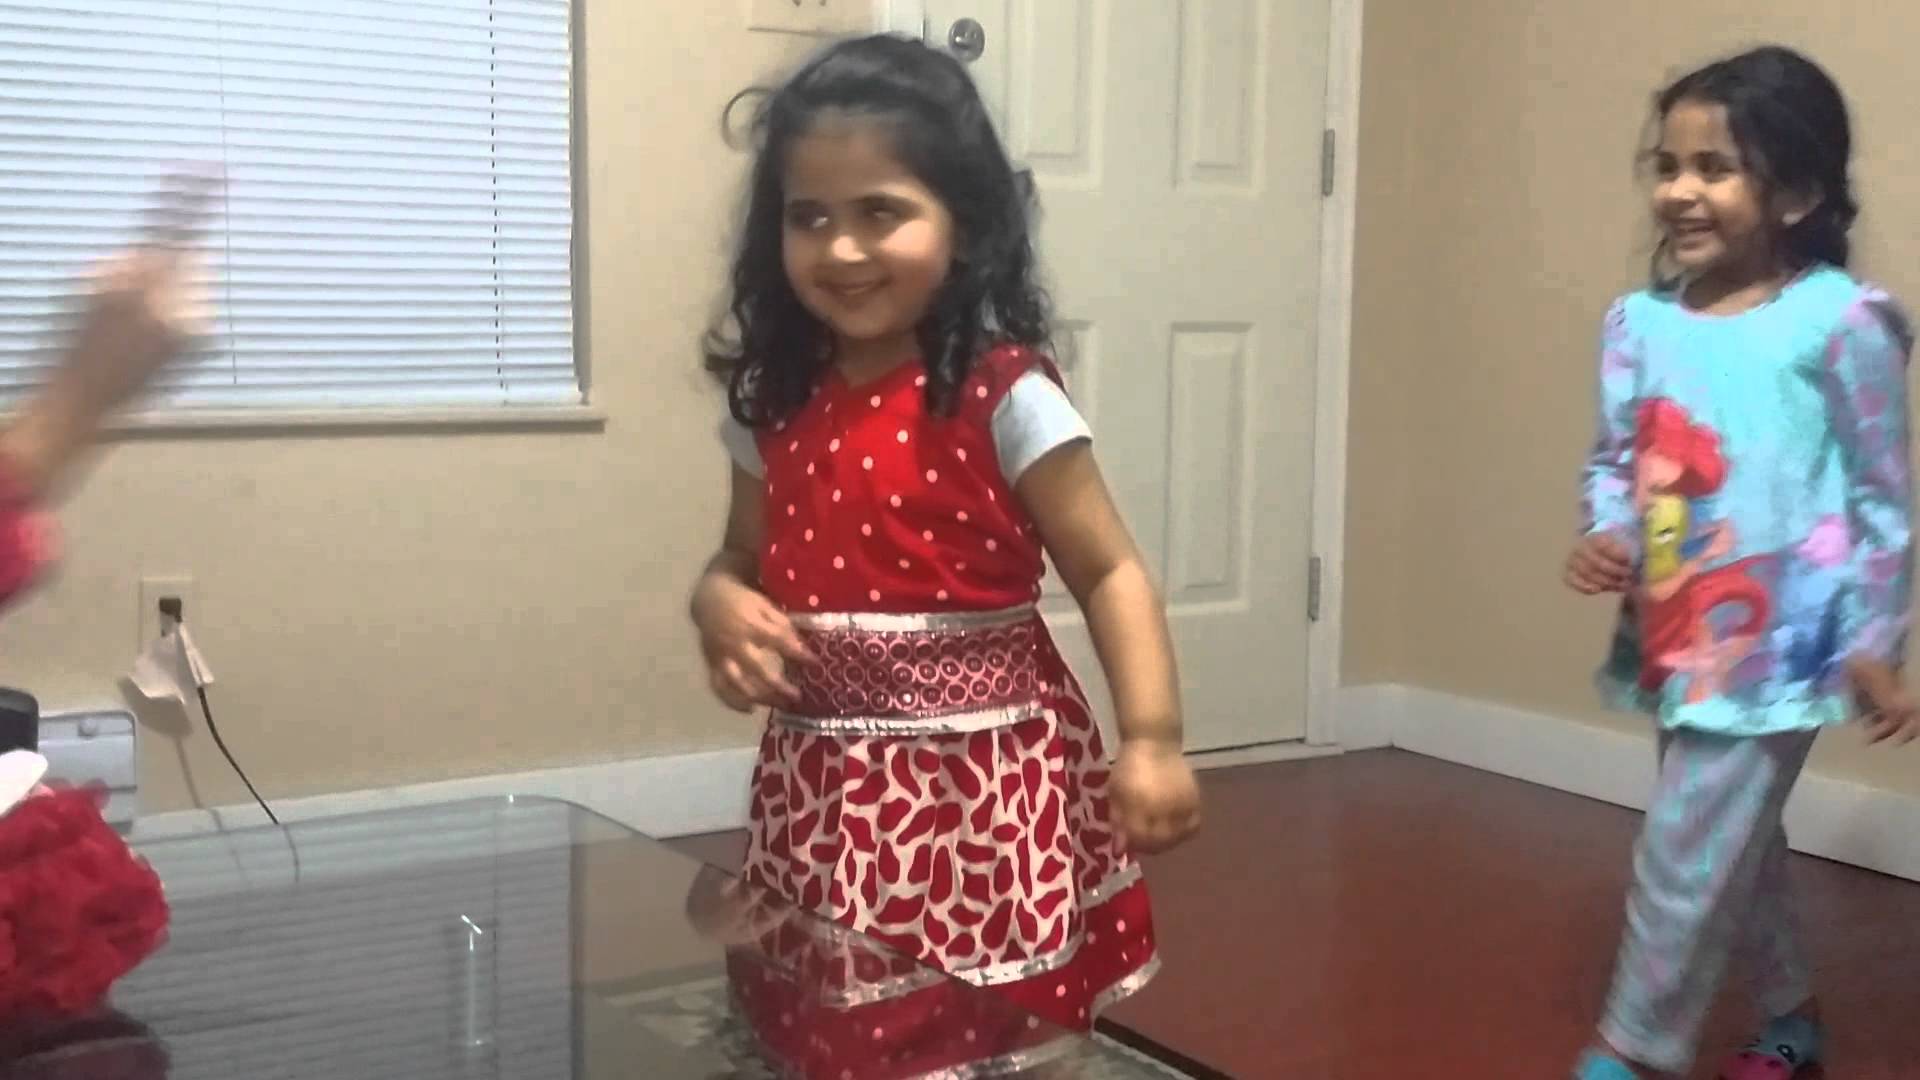 Little girl just learned shake your bum bum dance - YouTube